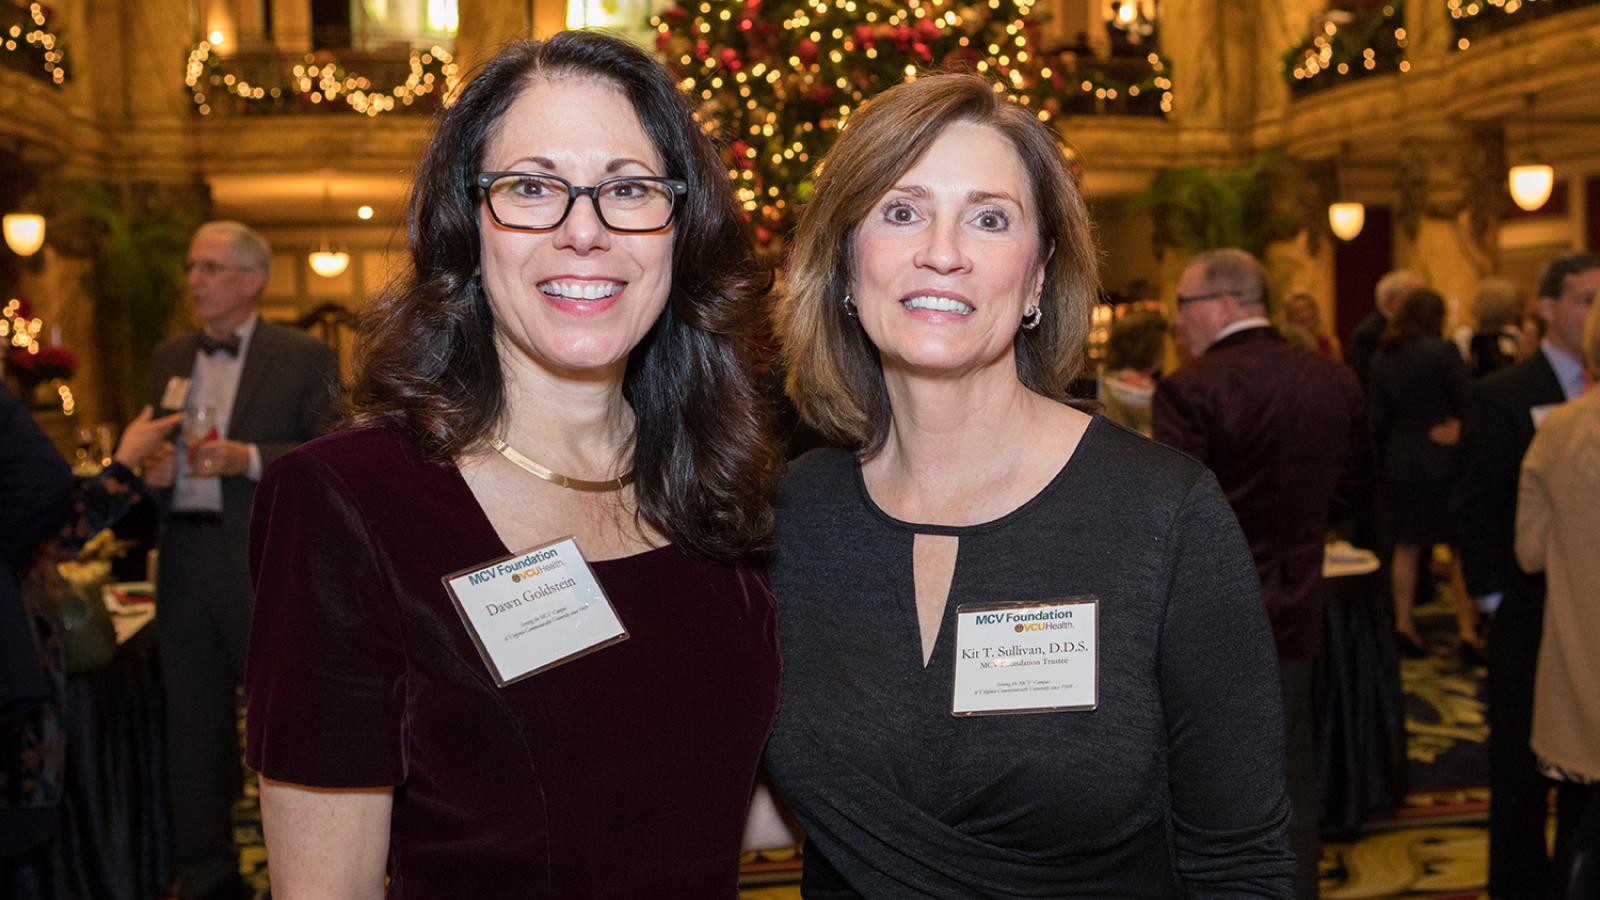 Dawn Goldstein, Ph.D., former recipient of a Ginger Edwards Clinical Scholars Award, with MCV Foundation board member Kit Sullivan, D.D.S.